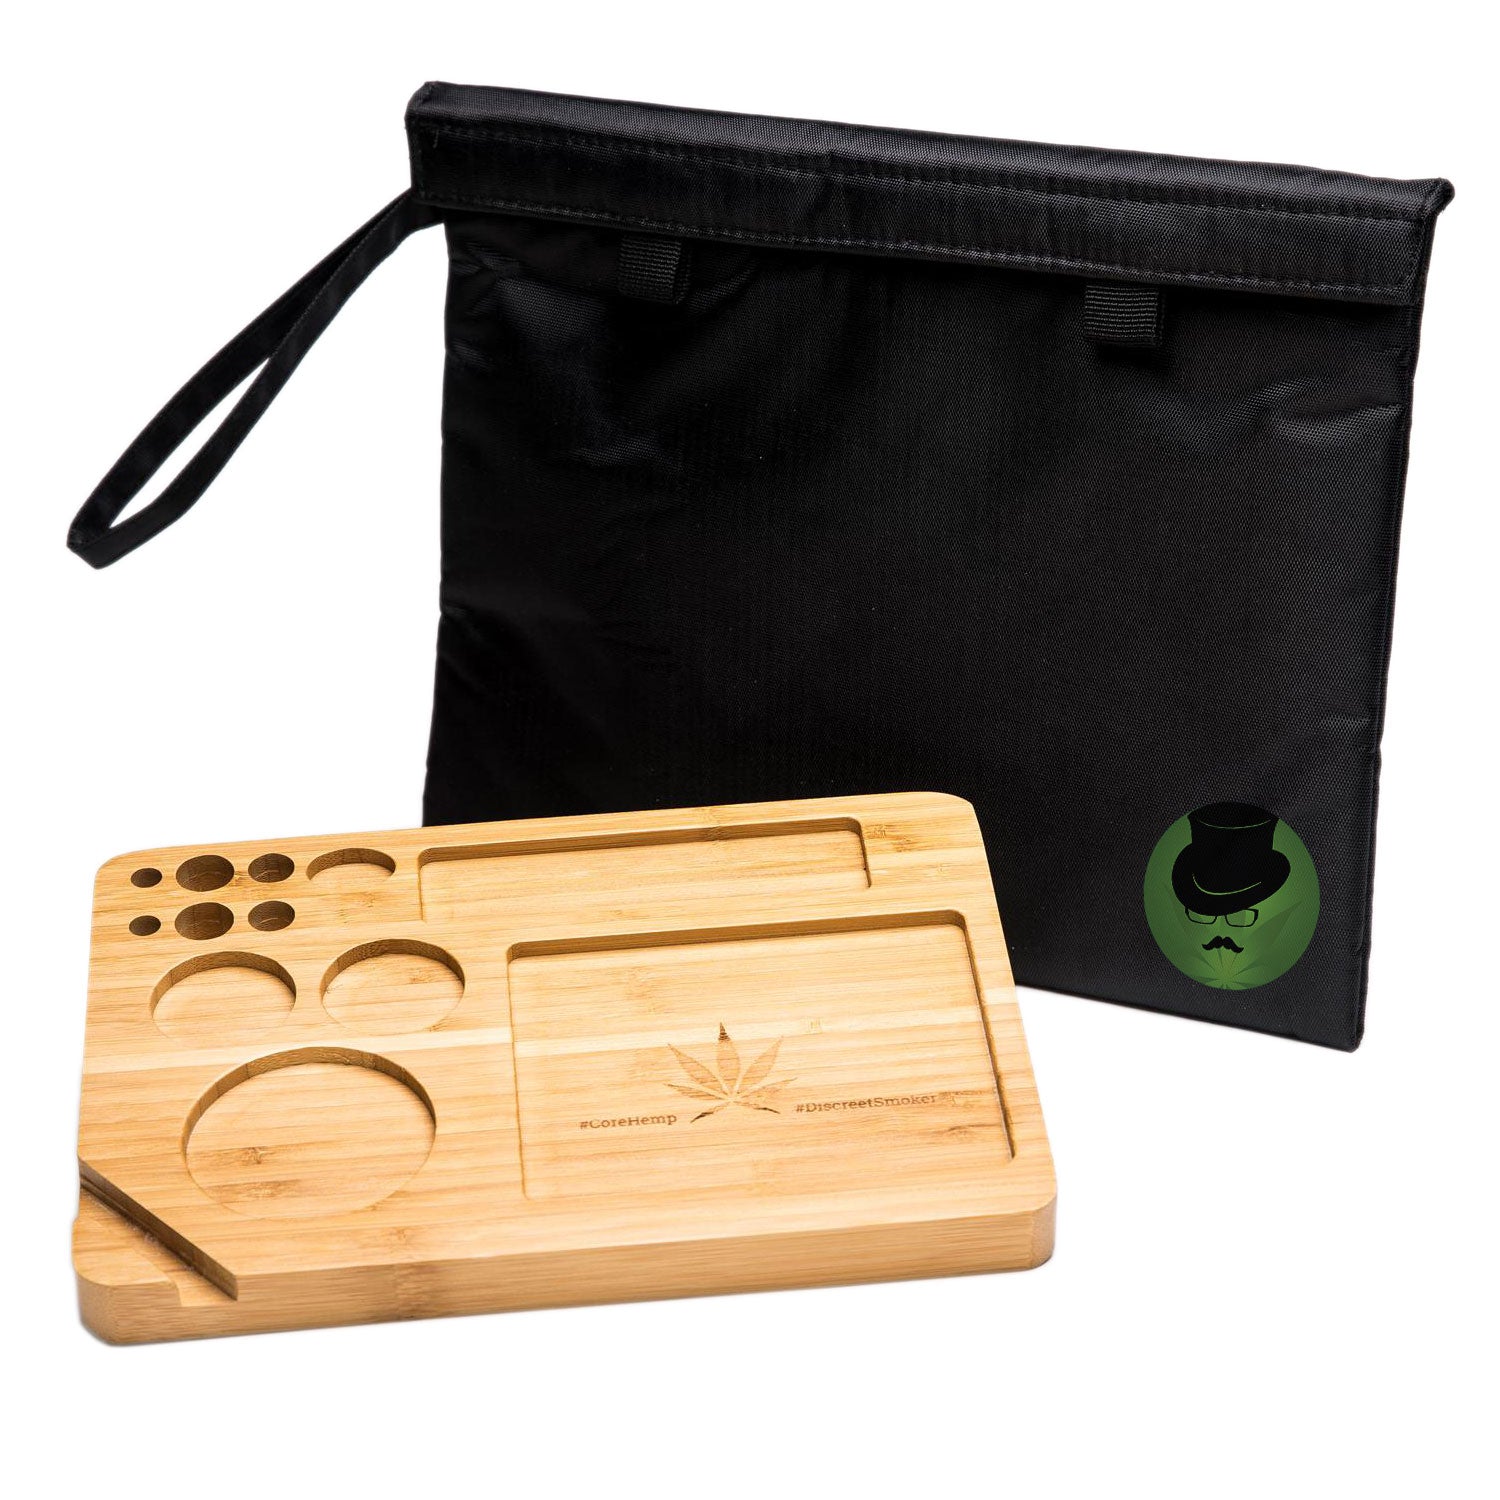 Bamboo Rolling Tray with Smell Proof Velcro Bag Front View Alternative, bamboo rolling tray, natural bamboo tray, raw bamboo rolling tray, raw rolling tray wood, bamboo tray, inexpensive rolling tray, rolling tray for sale, unique rolling trays, blunt rolling tray, blunt tray, cool rolling tray, small rolling tray, weed rolling tray